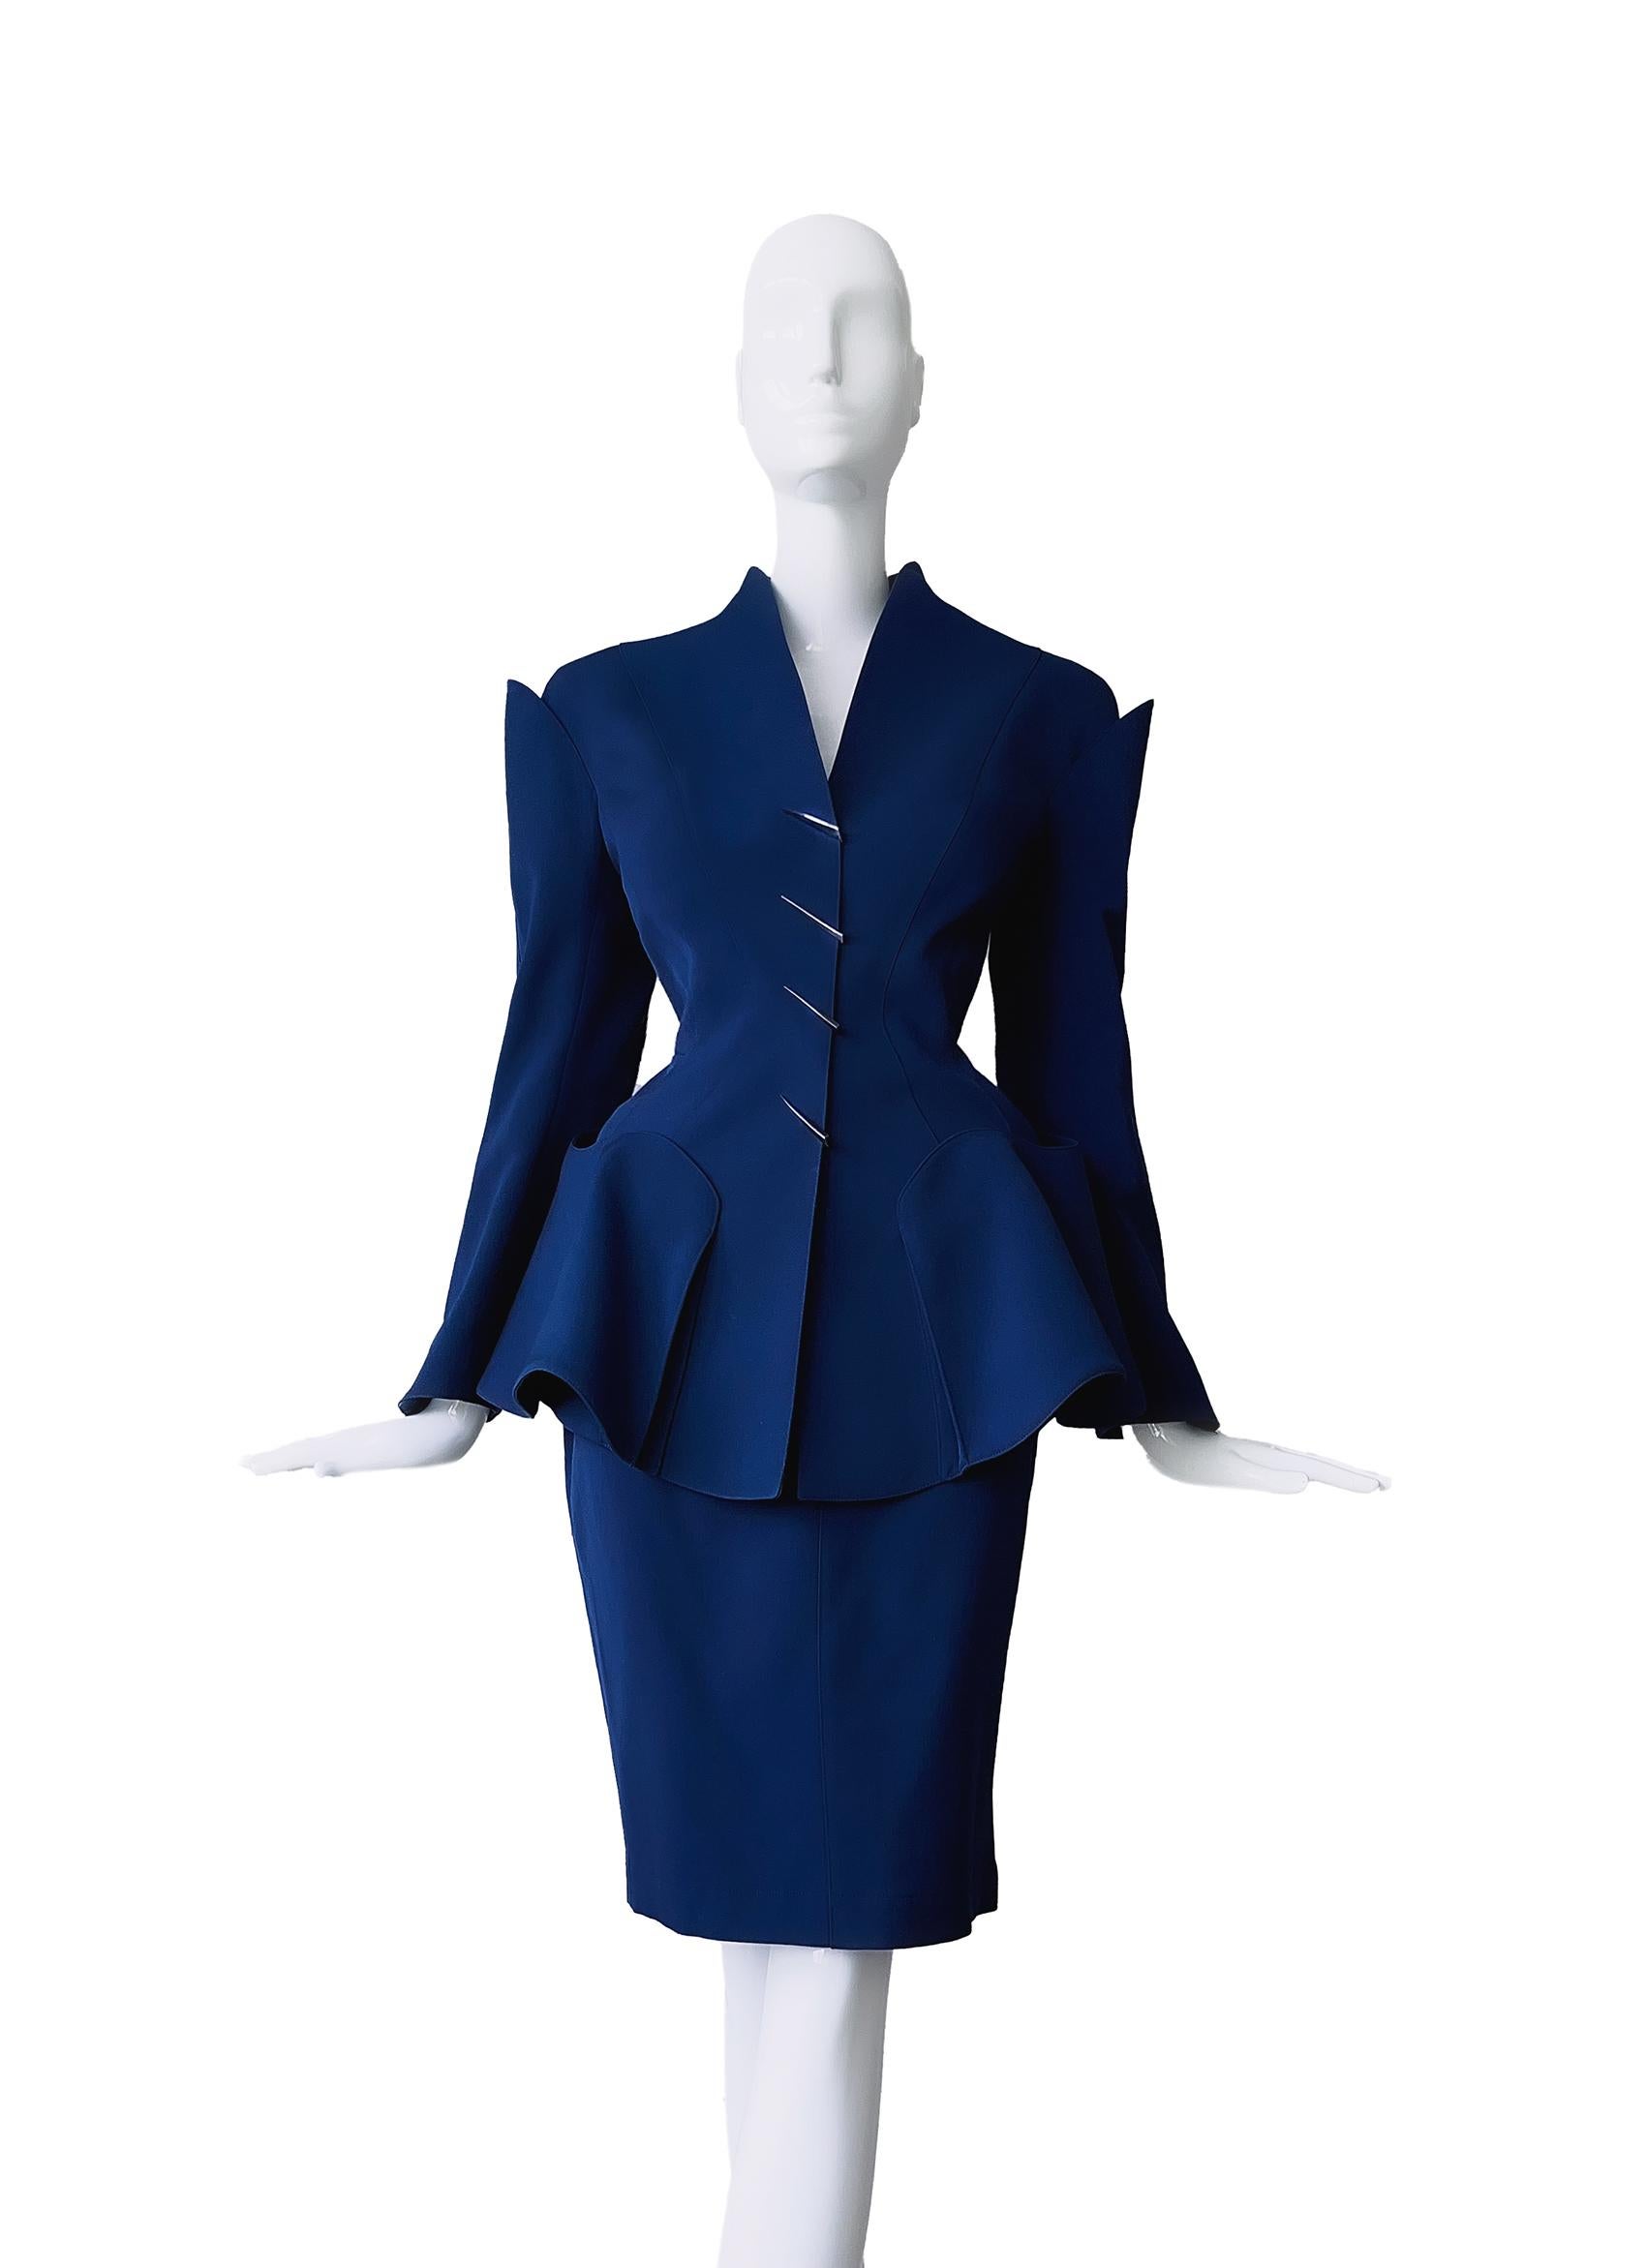 Thierry Mugler Scuptural Suit  FW 1995  Architecture Collection Metal Details For Sale 6